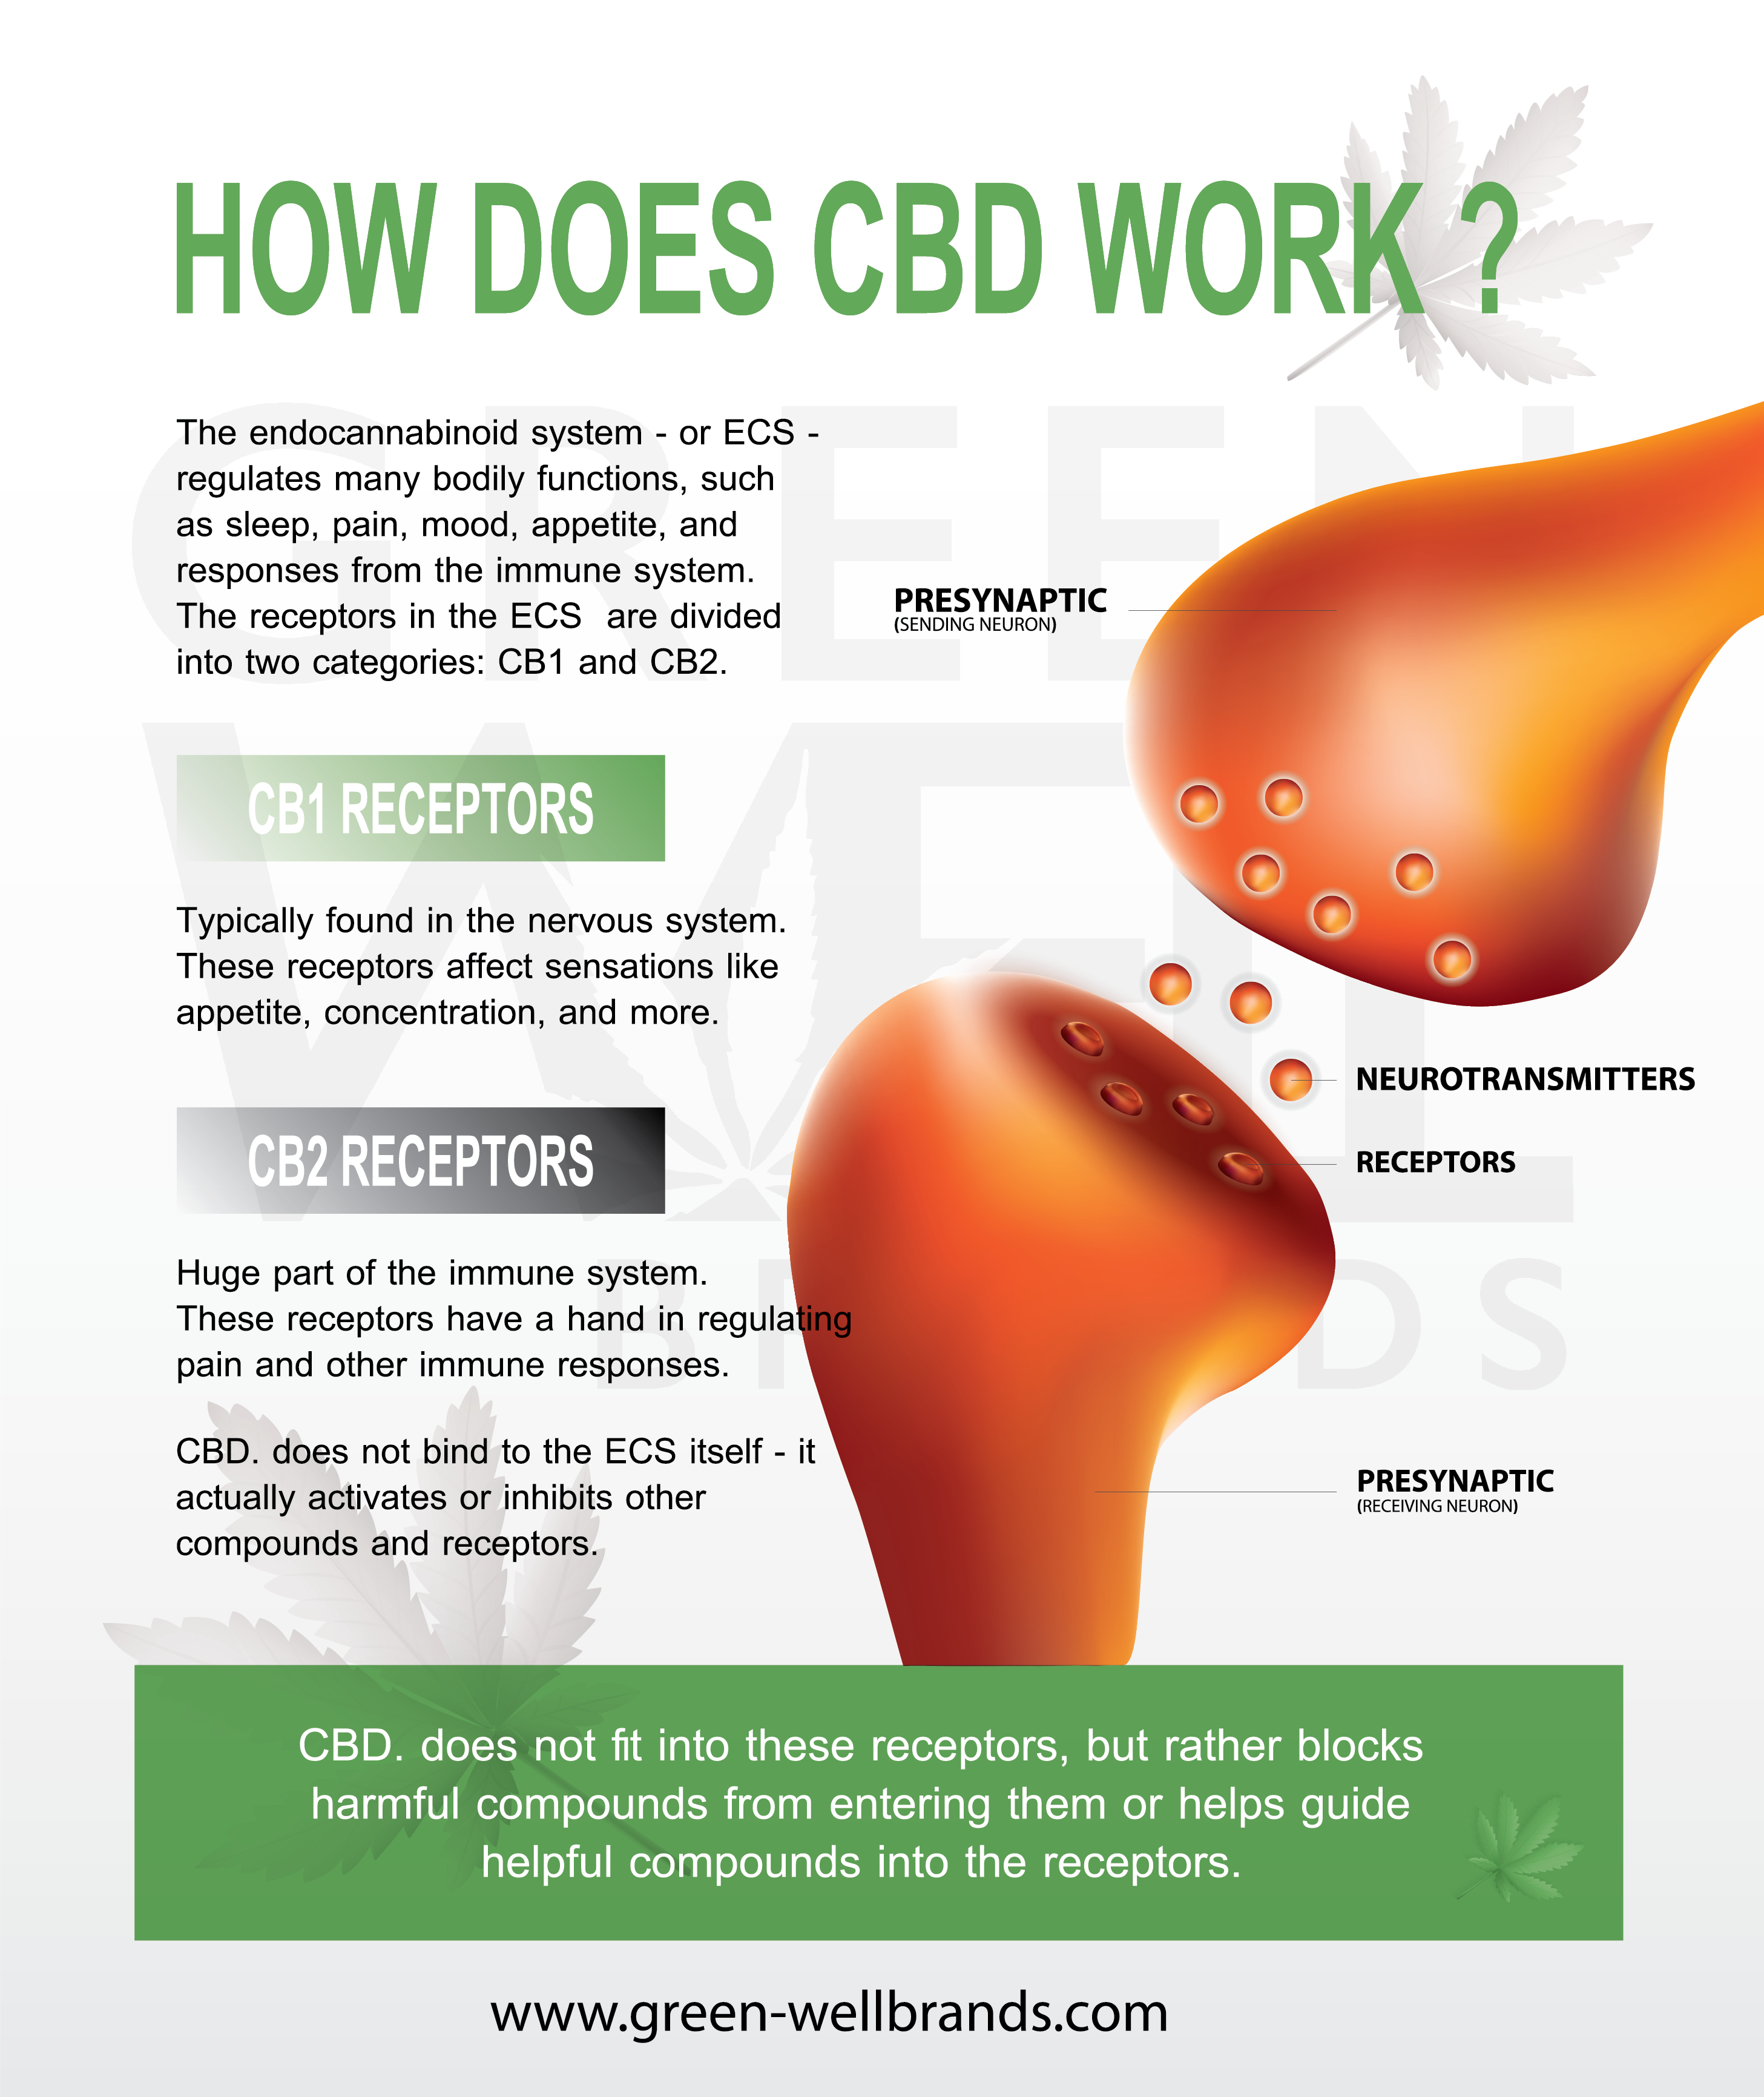 The basics on how CBD works within the body